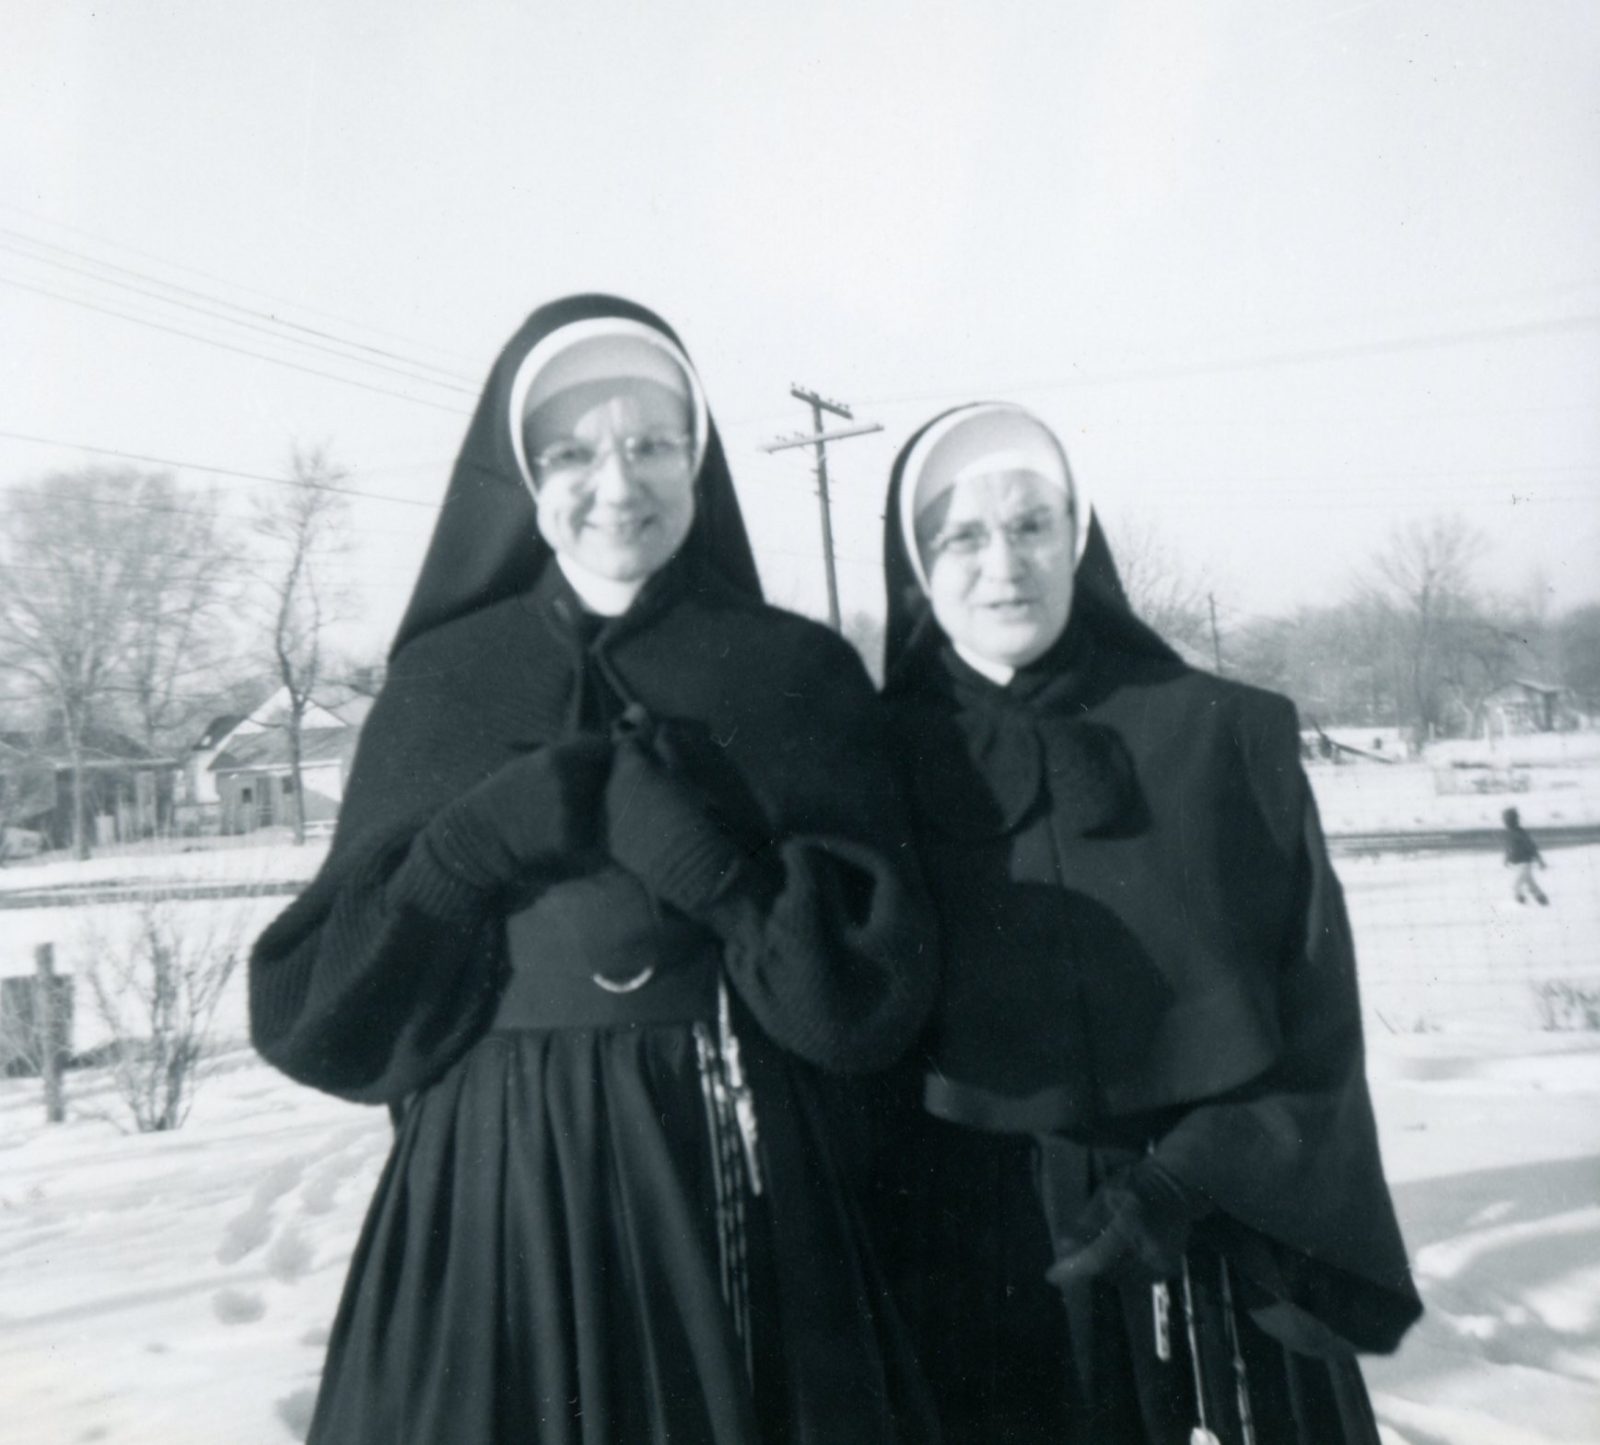 Nuns In Traditional Habits